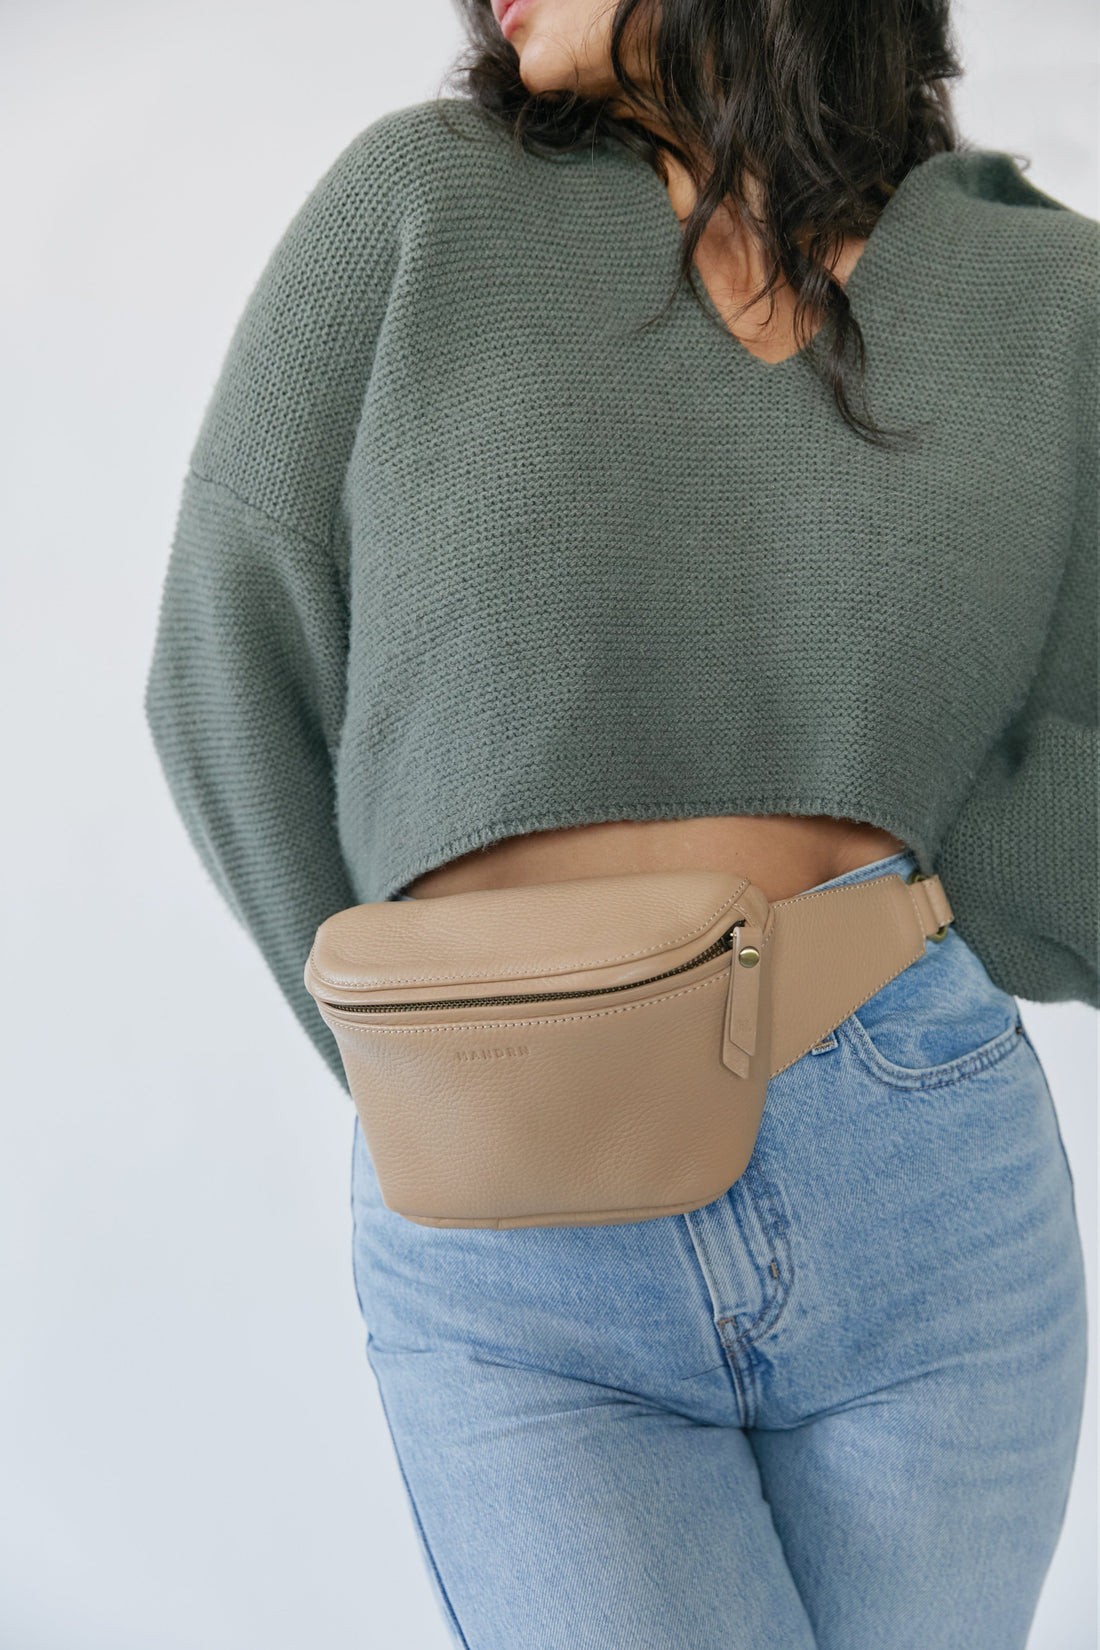 MANDRN  The Remy- Tan Leather Fanny Pack